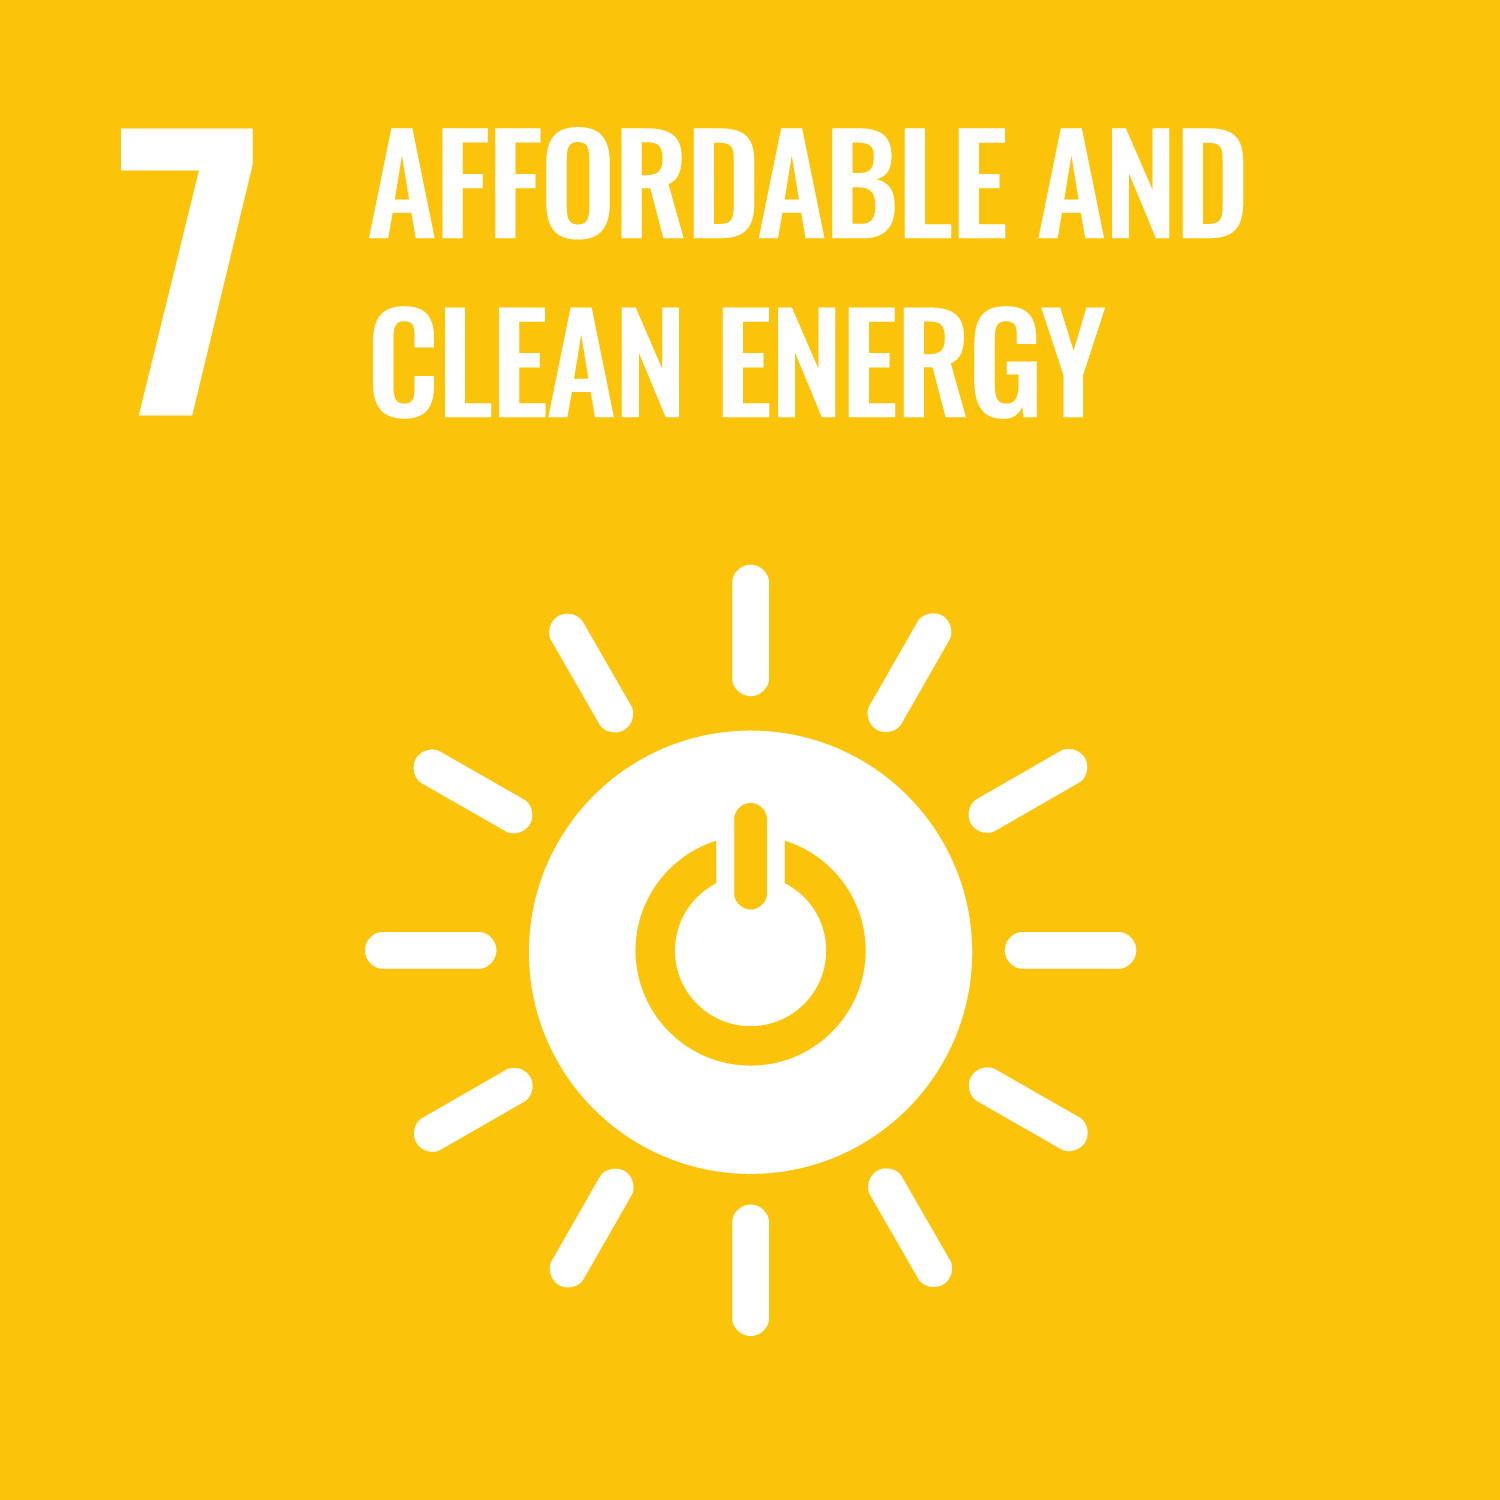 SDG icon #7: affordable and clean energy